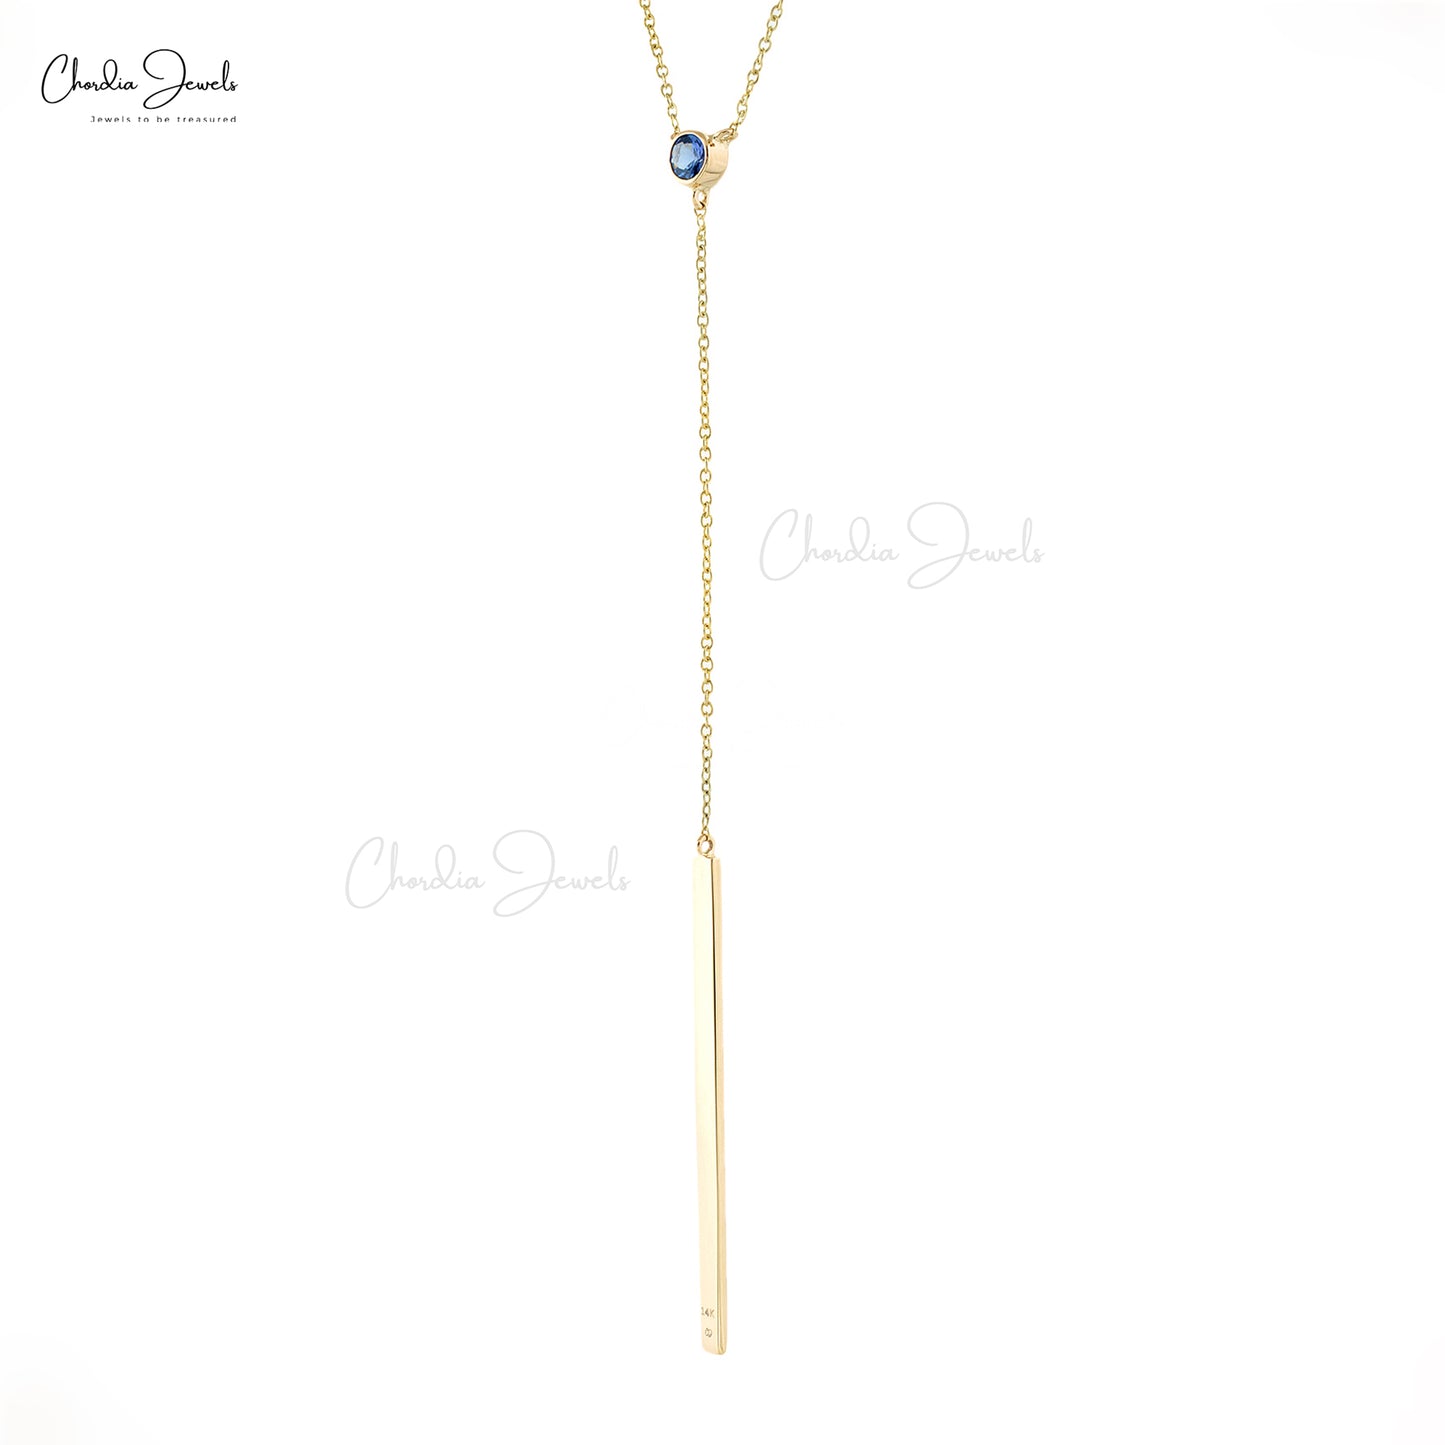 Genuine Tanzanite Lariat Necklace 3.5mm Round Cut Spring Ring Dainty Necklace 14k Real Yellow Gold Hallmarked Fine Jewelry For Anniversary Gift